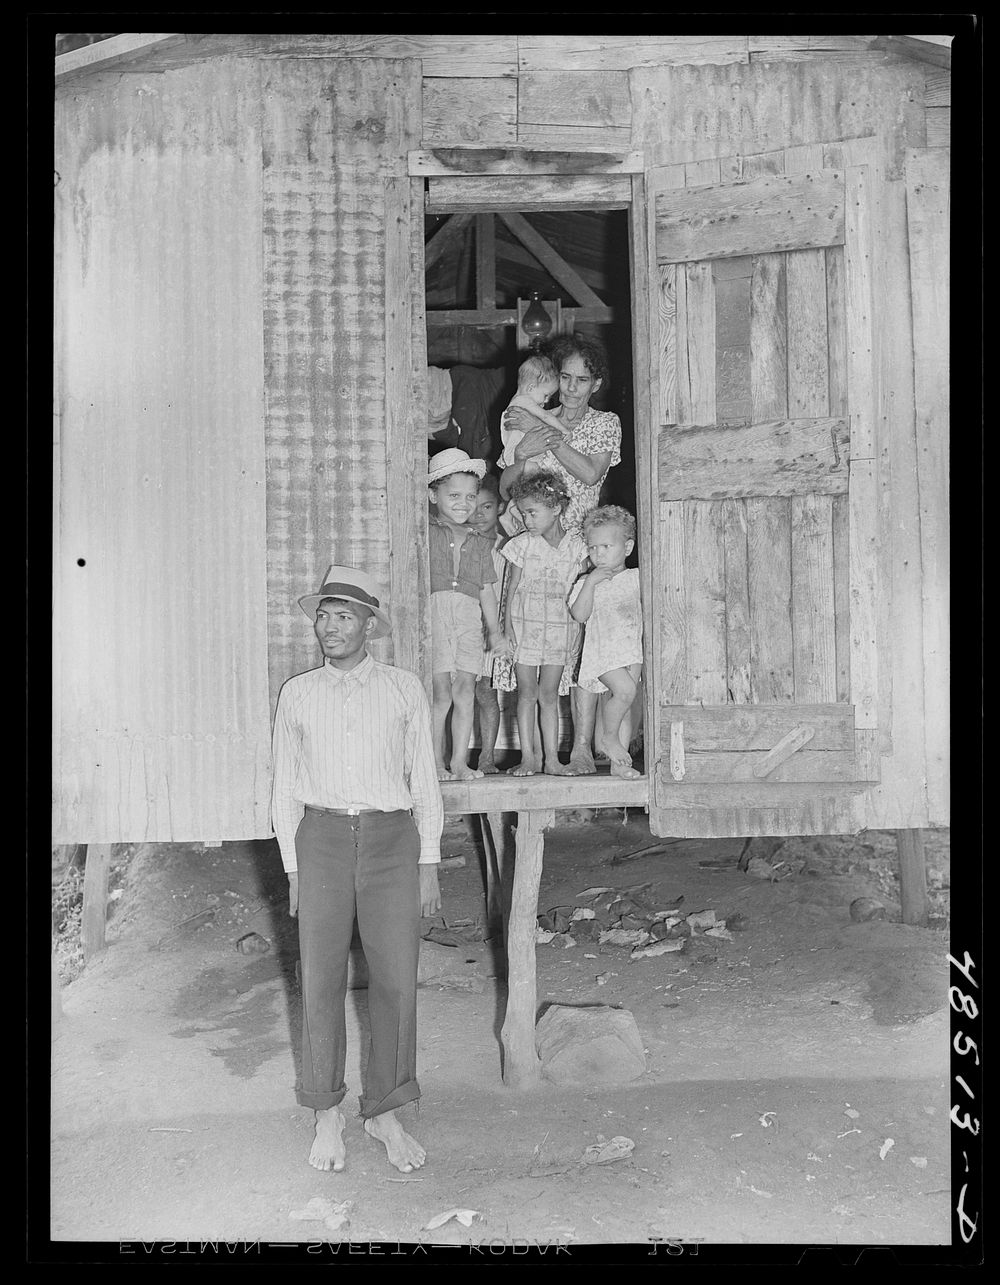 [Untitled photo, possibly related to: Yabucoa, Puerto Rico. Striking sugar cane worker and his family]. Sourced from the…